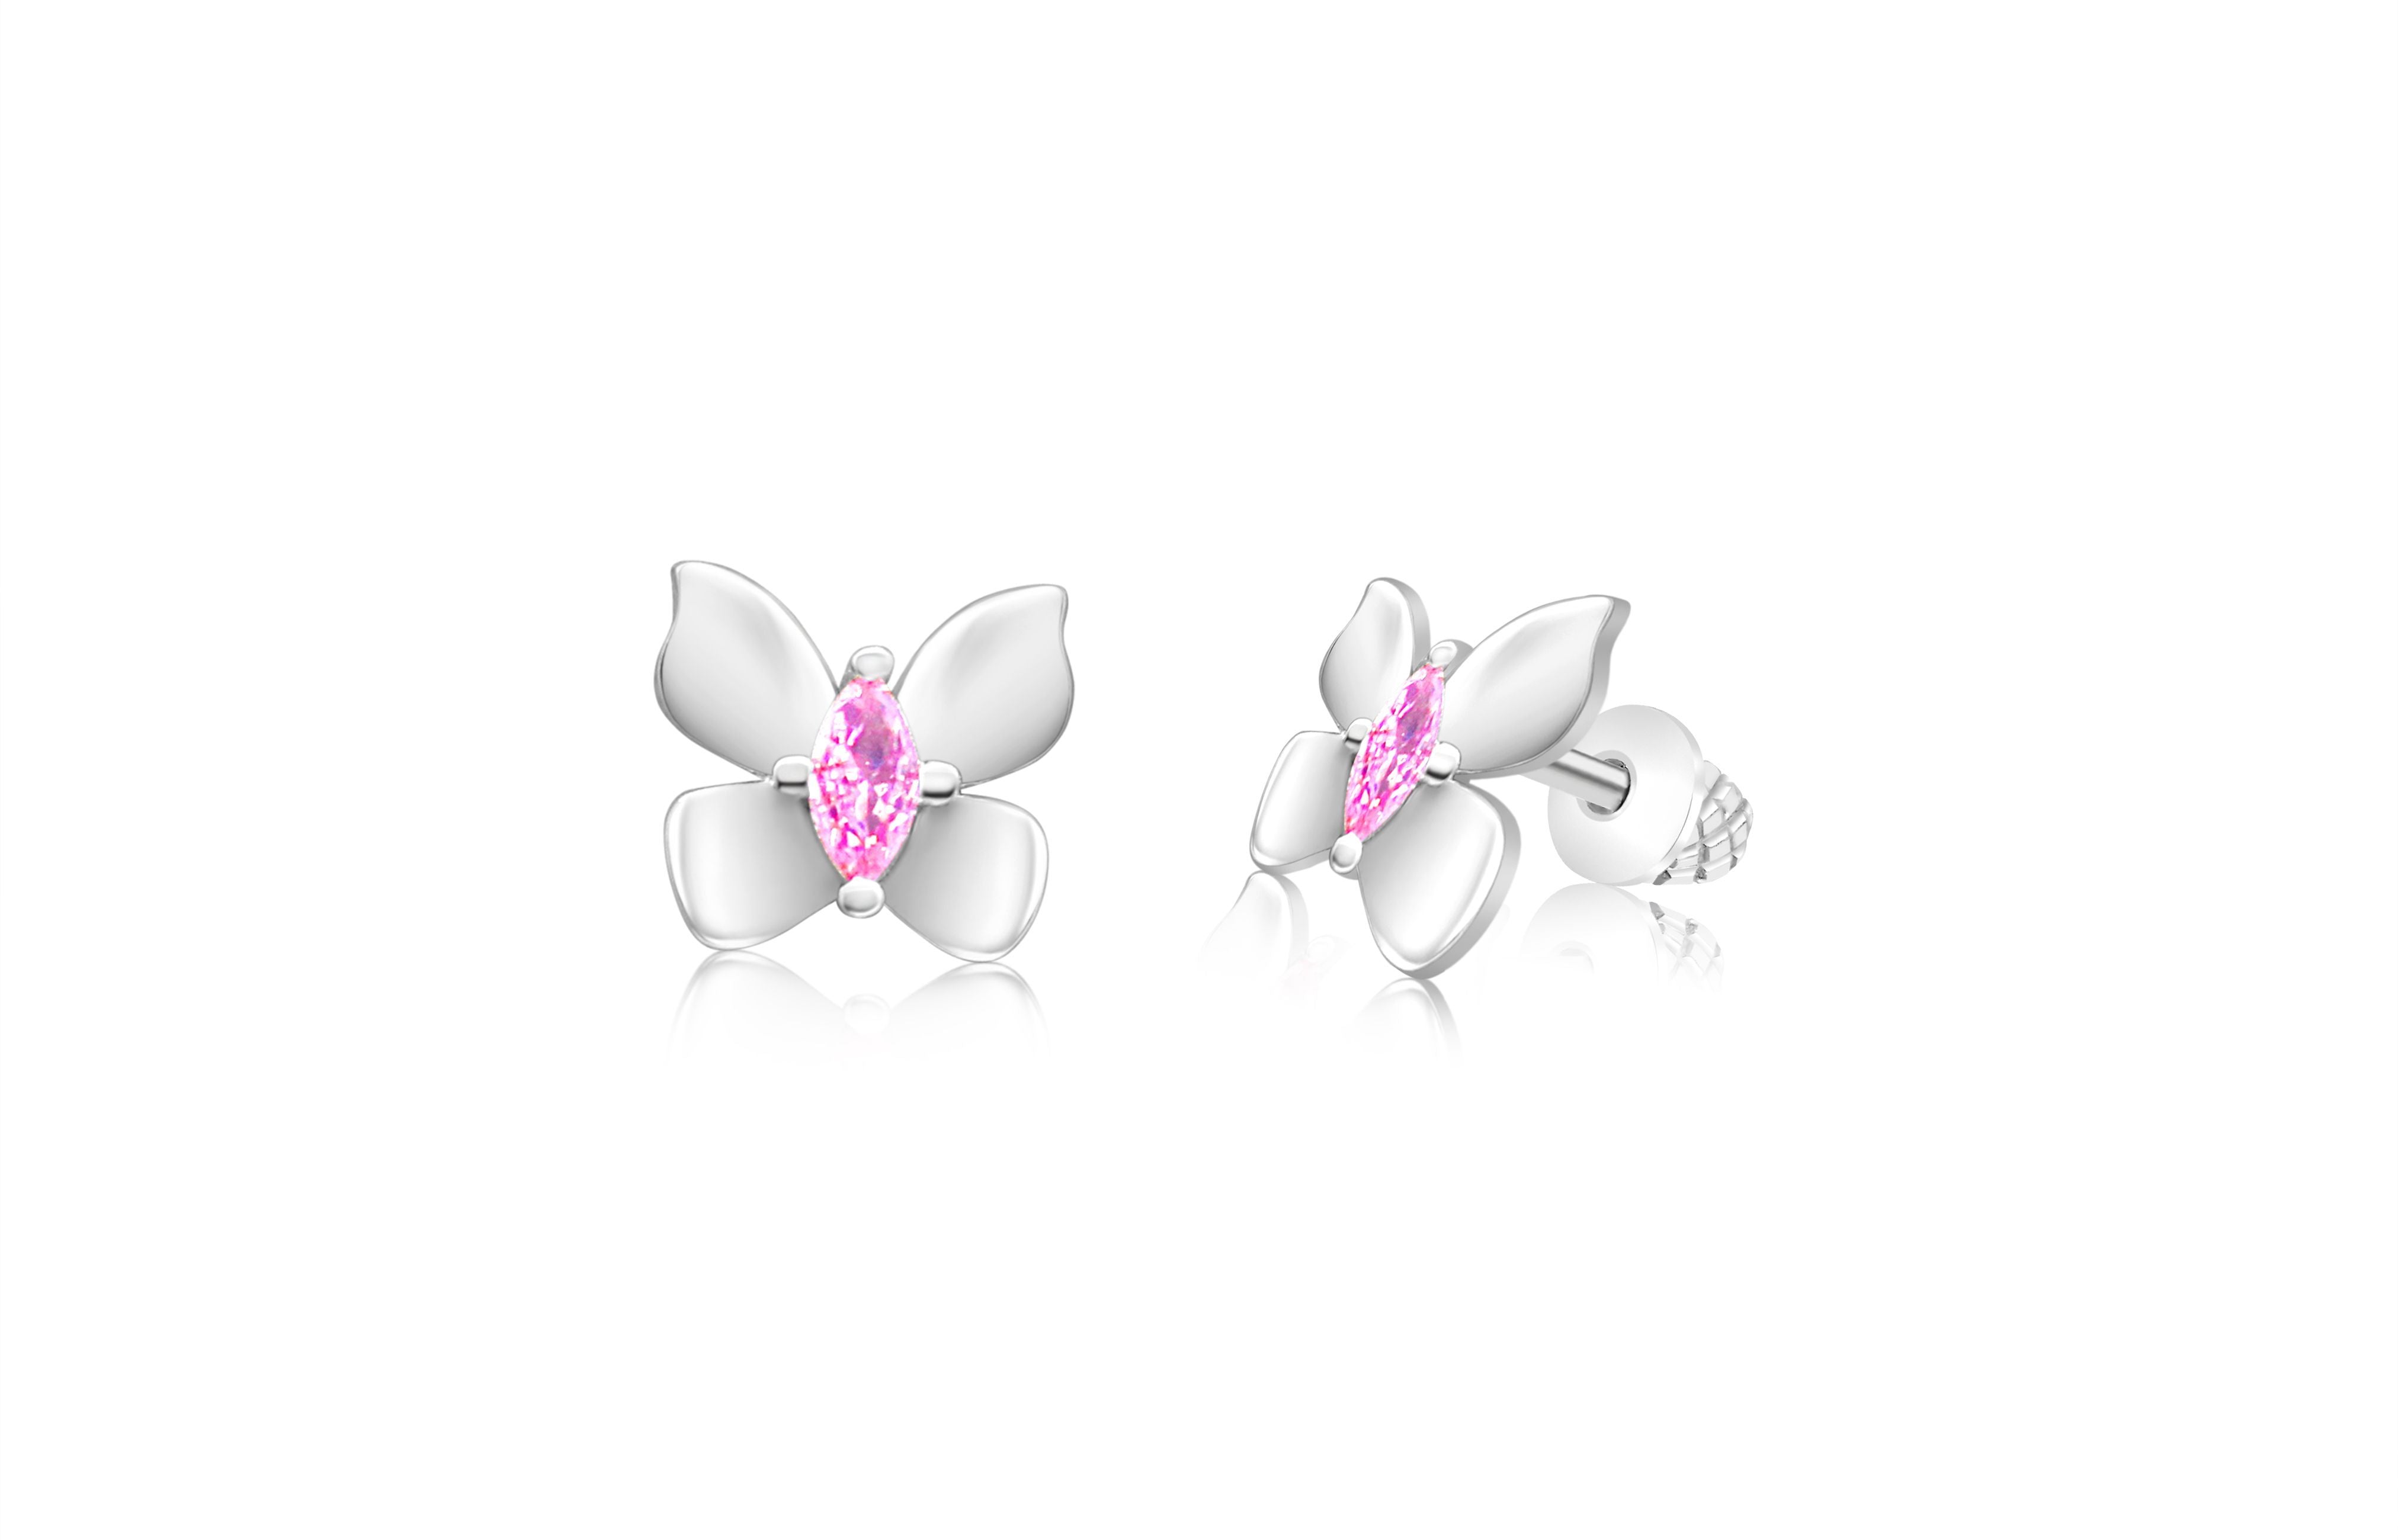 Children's Earrings - Premium 8mm Crystal Butterfly Screwback Kids Baby Girl Earrings with Swarovski Elements by Chanteur Surgical Titanium Posts with